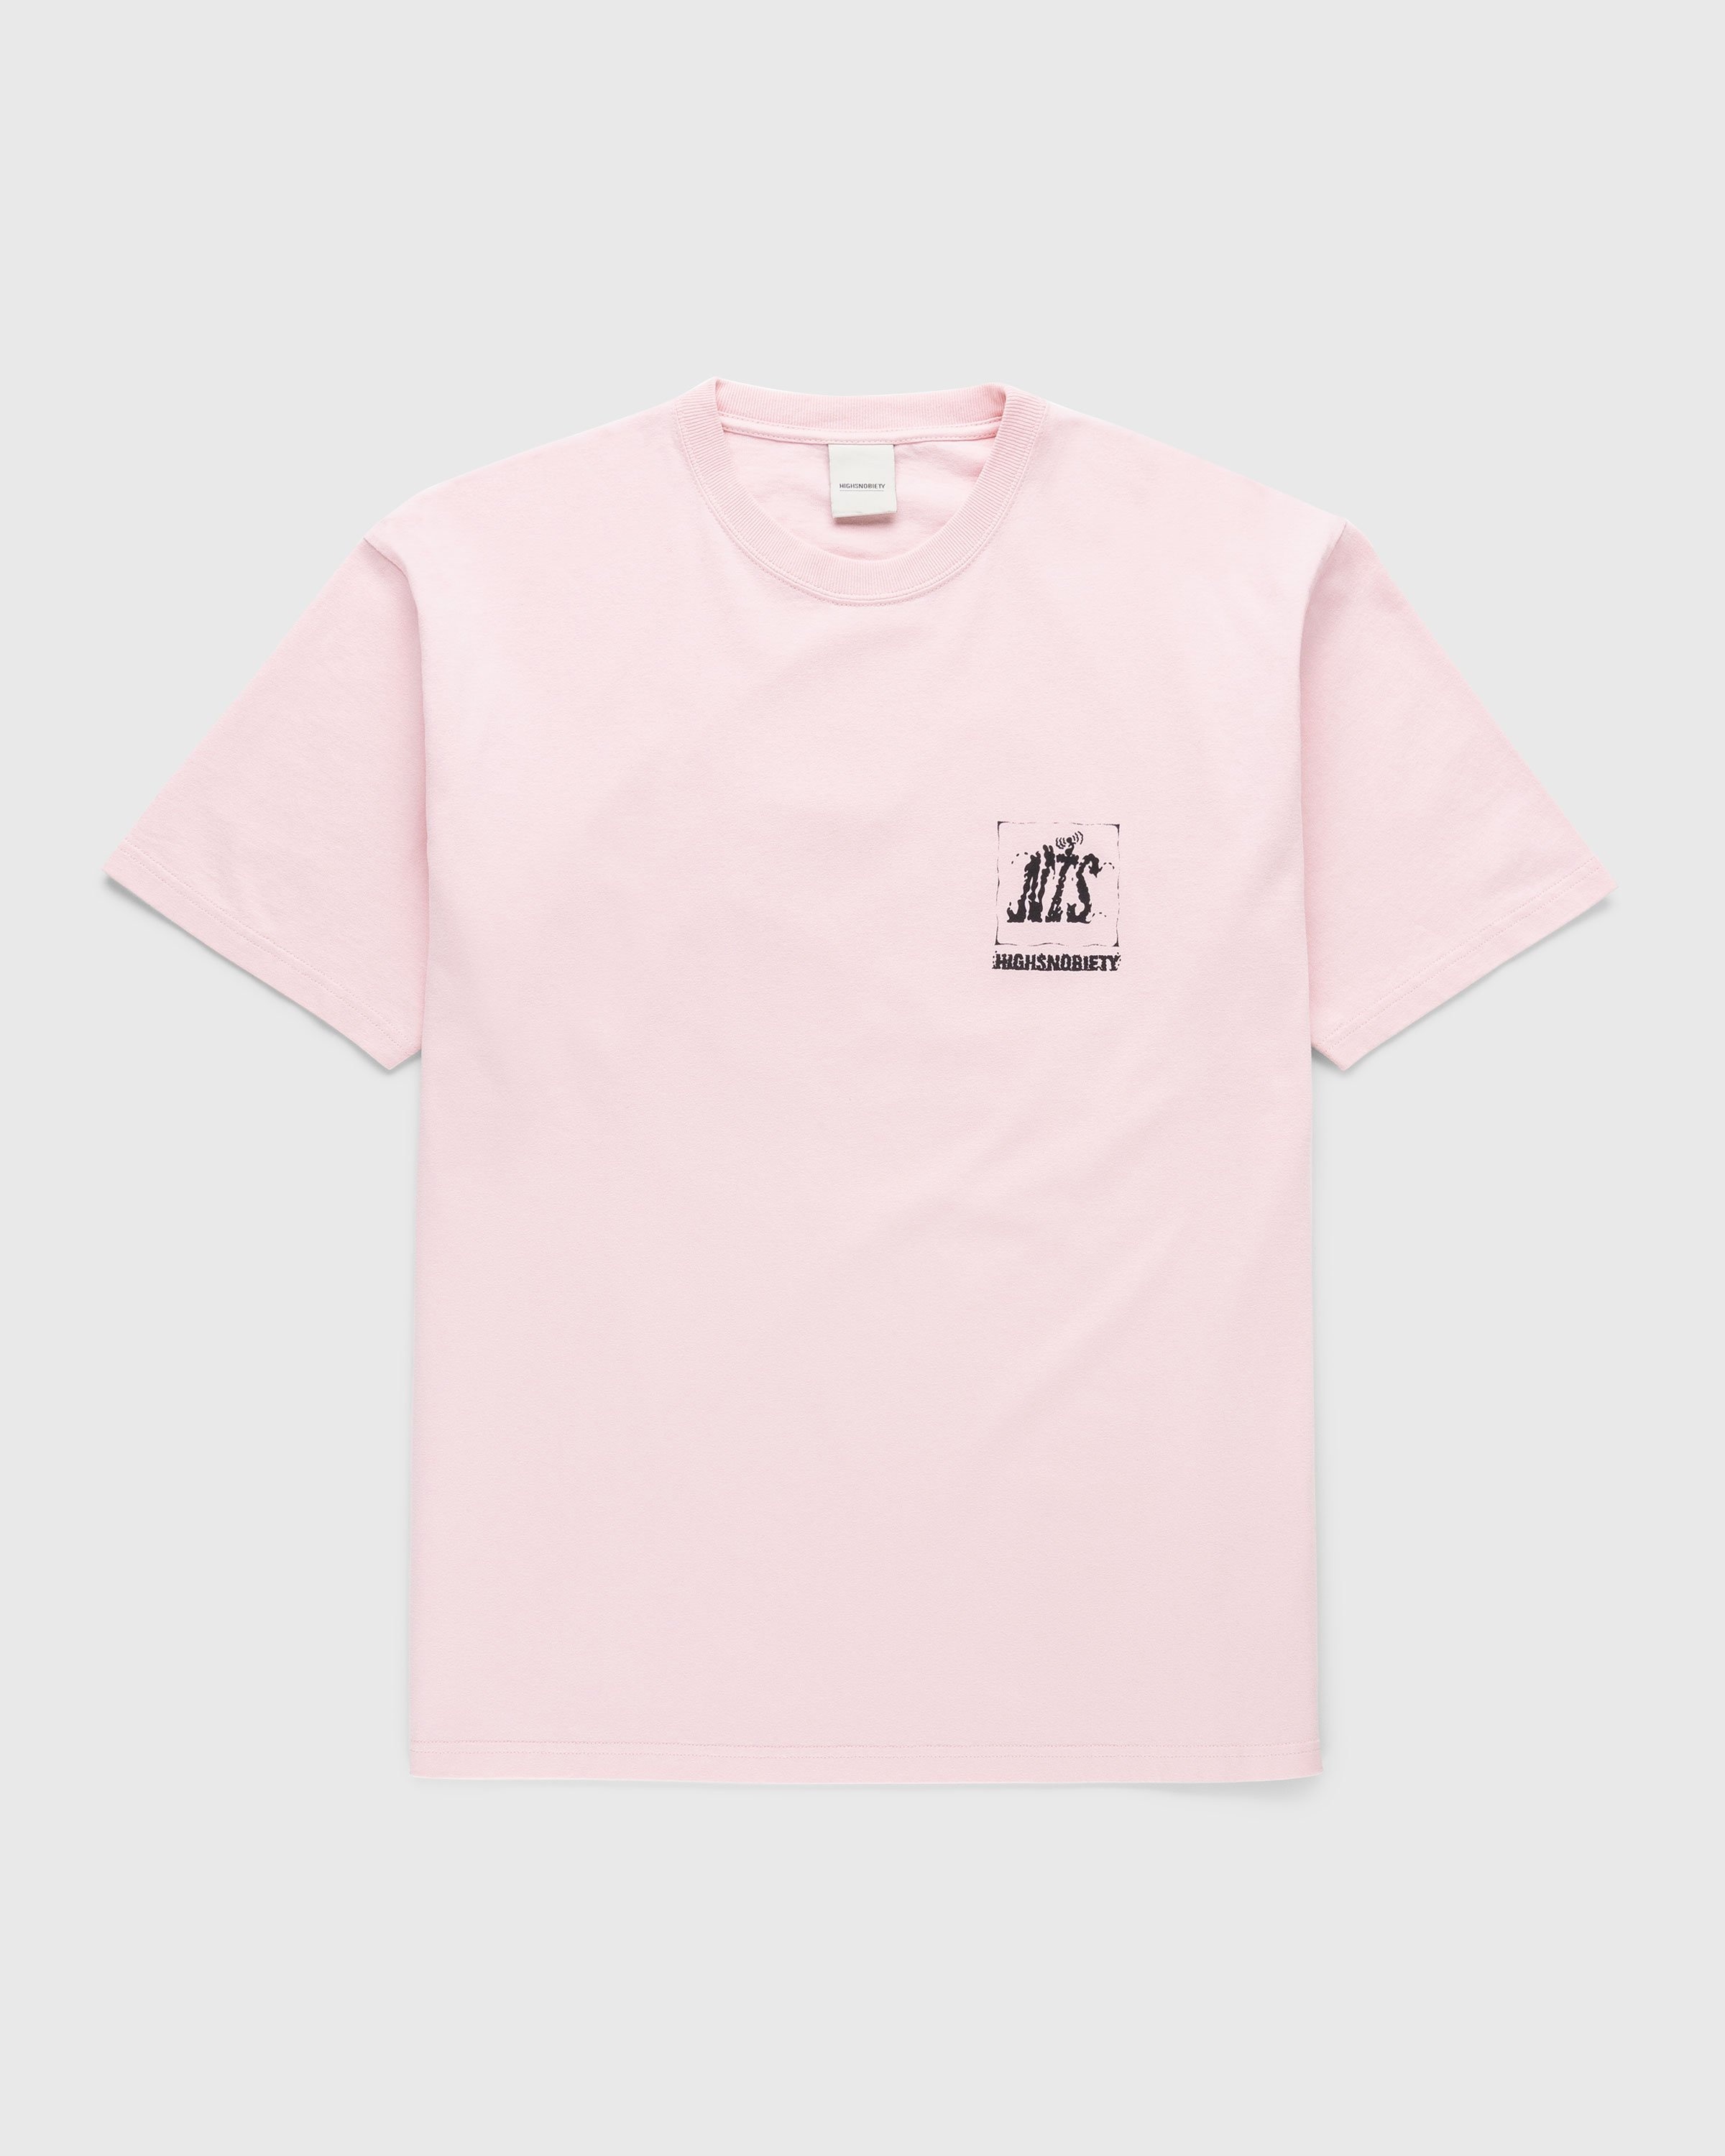 NTS x Highsnobiety – Graphic T-Shirt Pink  - Tops - Pink - Image 2